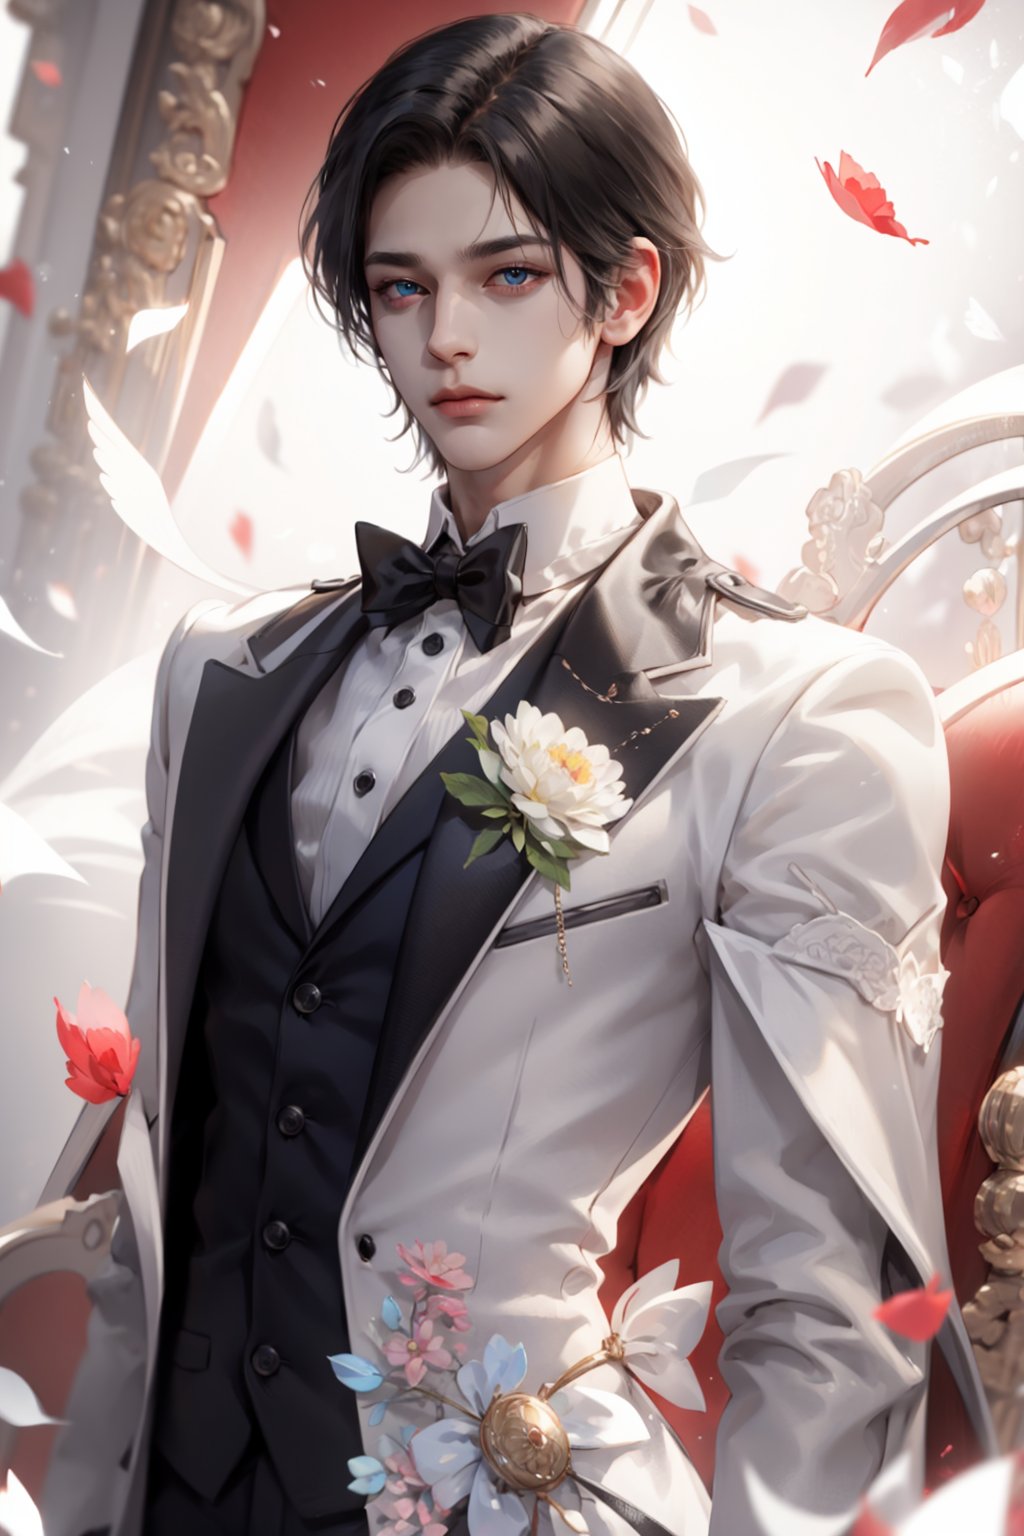 (asterpiece:1.2, best quality), (Soft light), (shiny skin), 1person, manly, handsome, short_black_hair, short_black_hair_man, suits, party, ballroom, ballgown, eye_lashes, collarbone, victorian, blue eyes, black suits , flowers petals,weiboZH,hll, red background